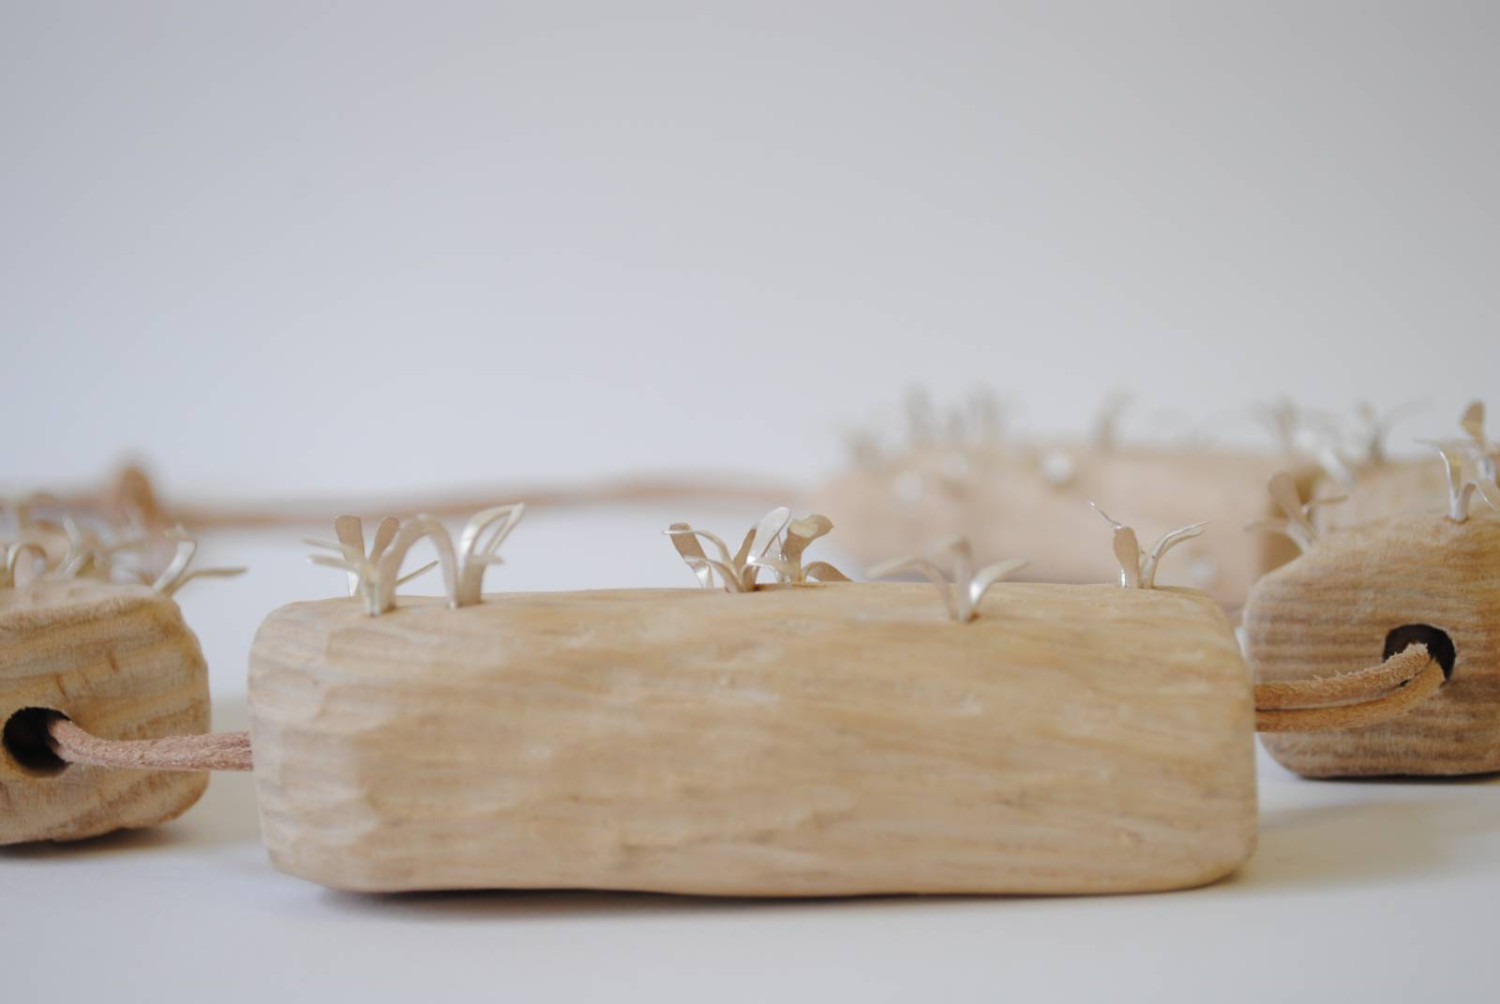 *The Bark that Blooms*, neckpiece. Wood (ash), sterling silver, leather cord (detail)